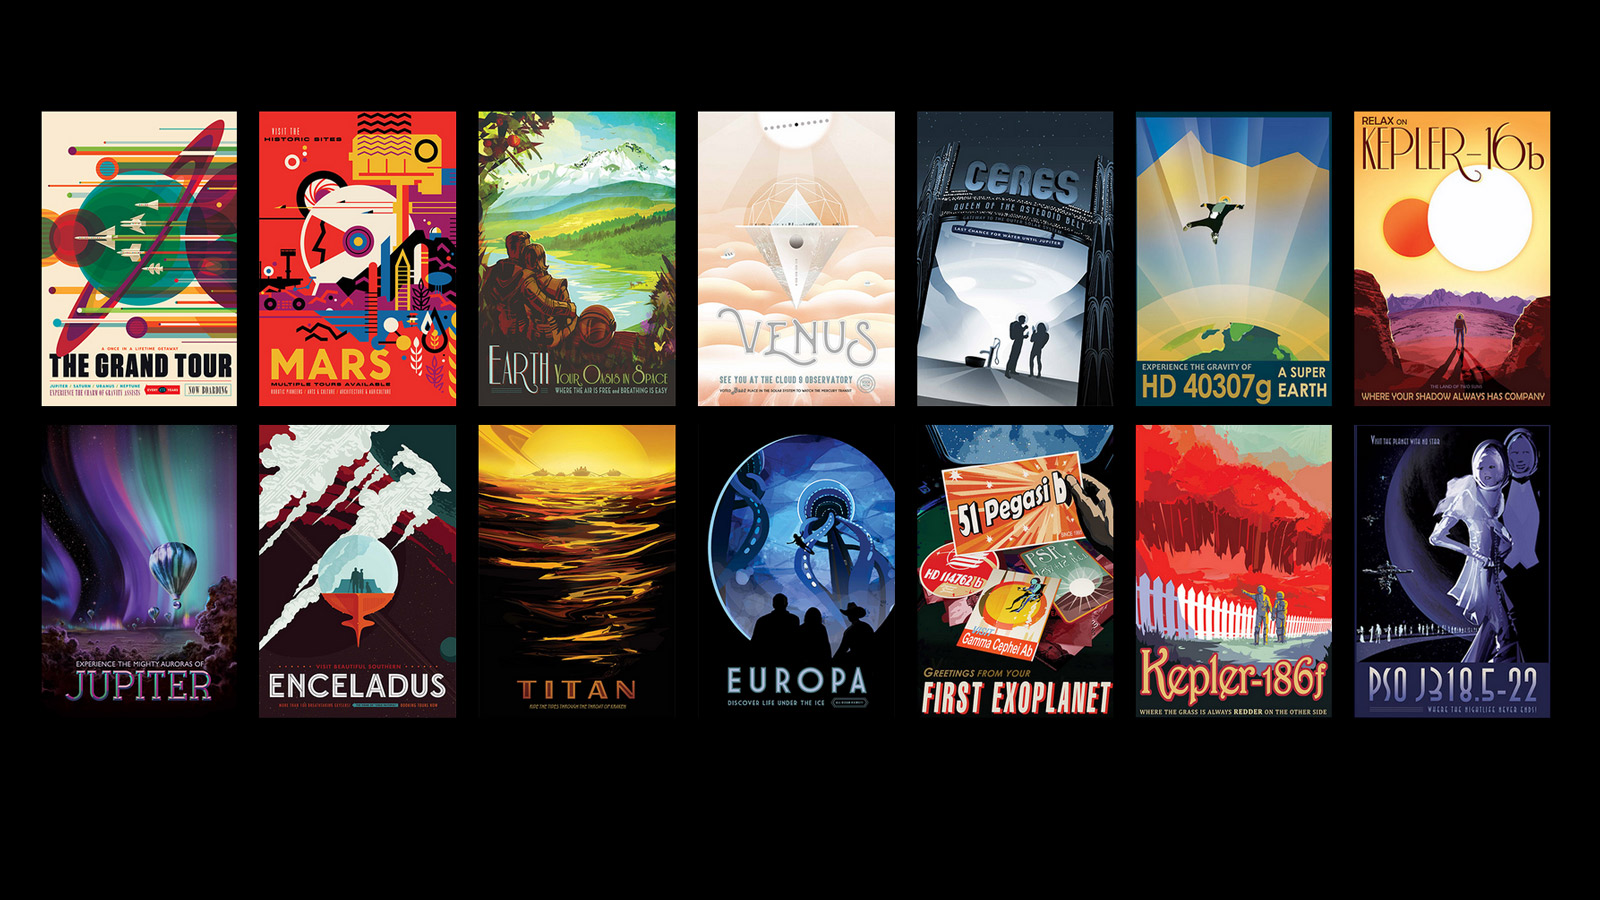 "Travel Posters" from NASA/JPL